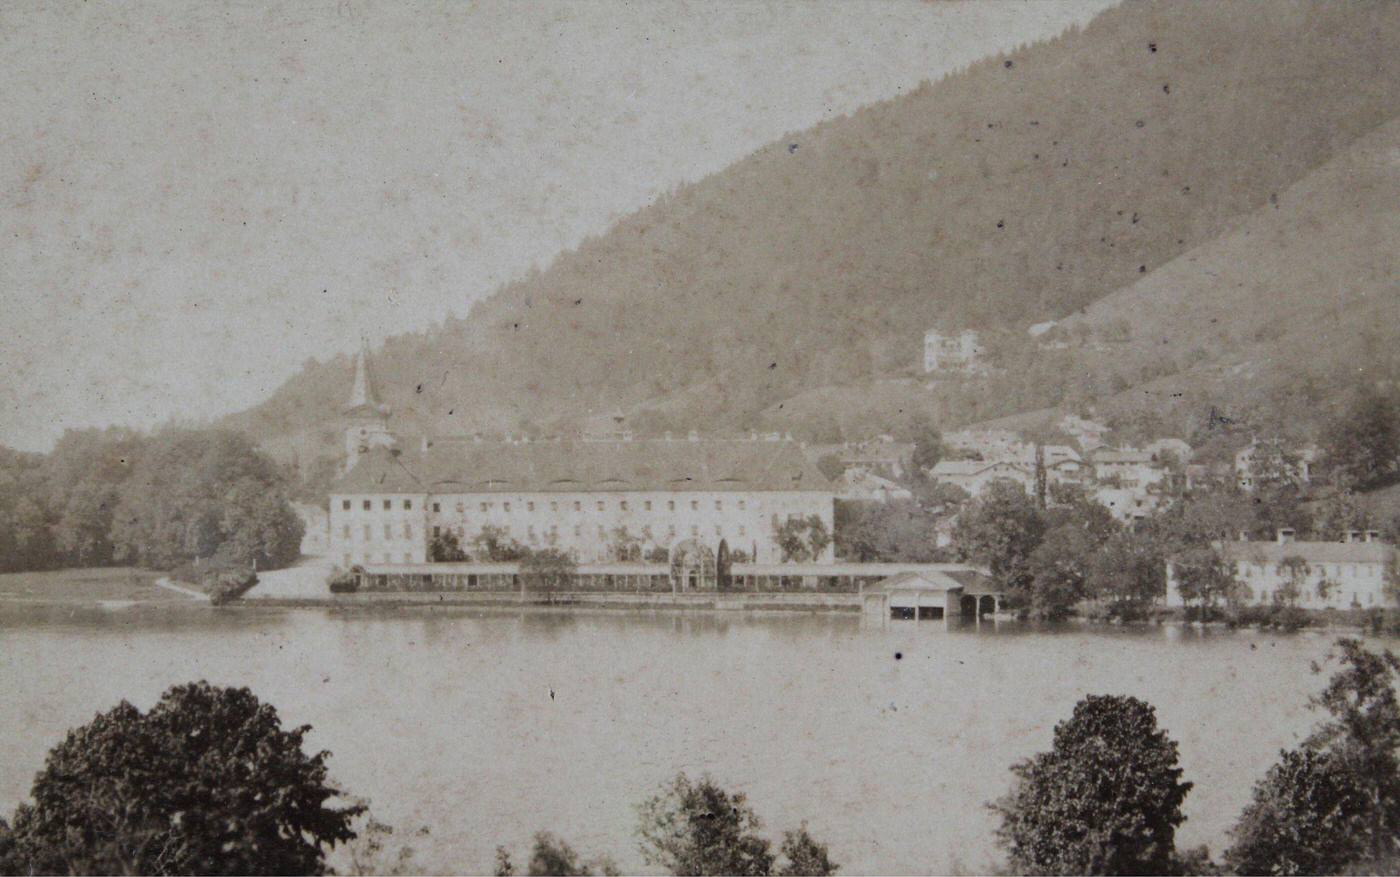 Tegernsee, lake and monastery view, 1880.